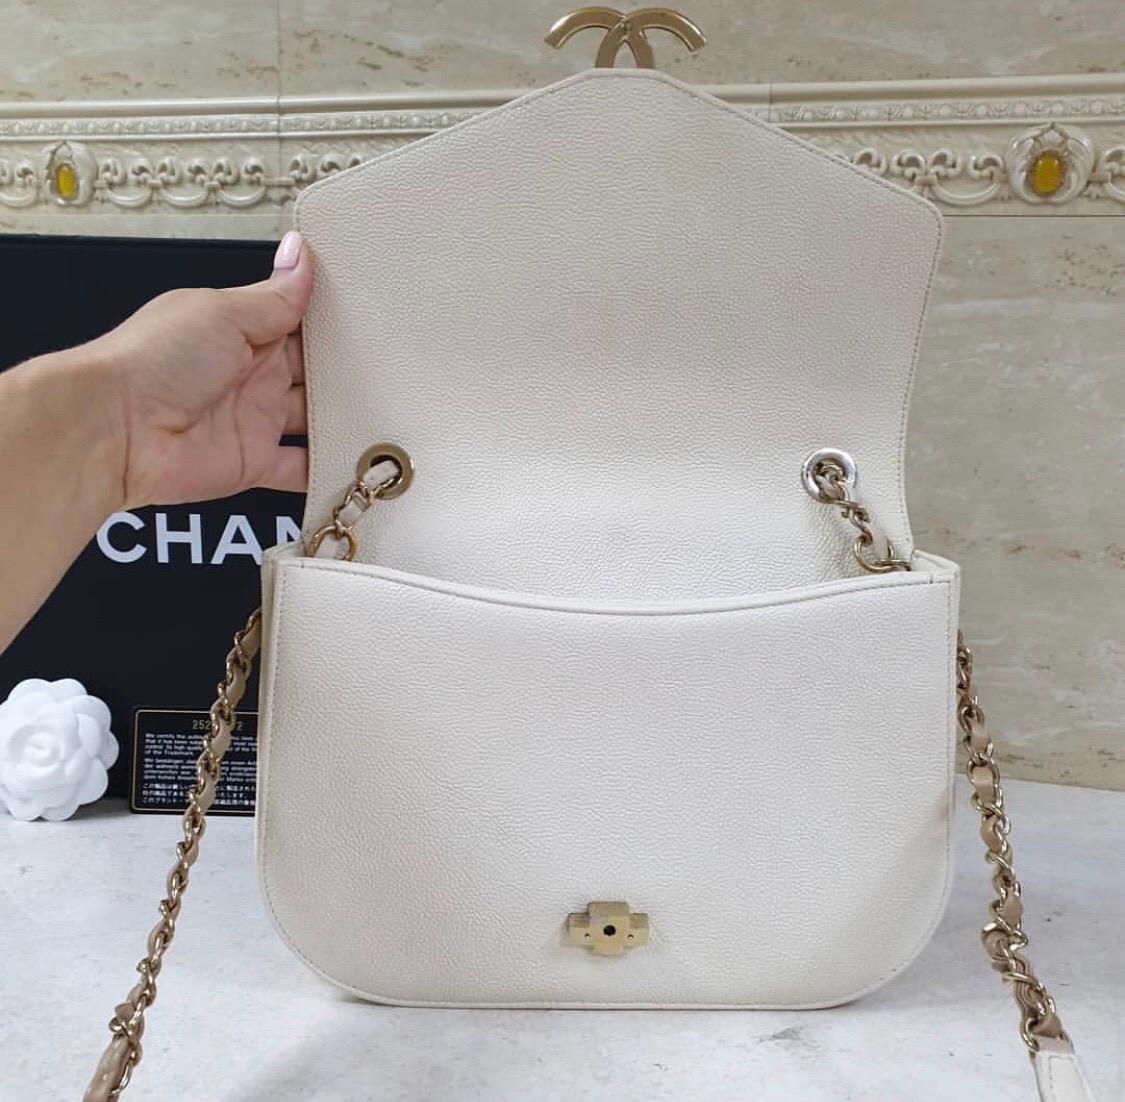 Chanel Grained Flap Bag with Top Handle New 2018 Ivory White Calfskin Tote 1